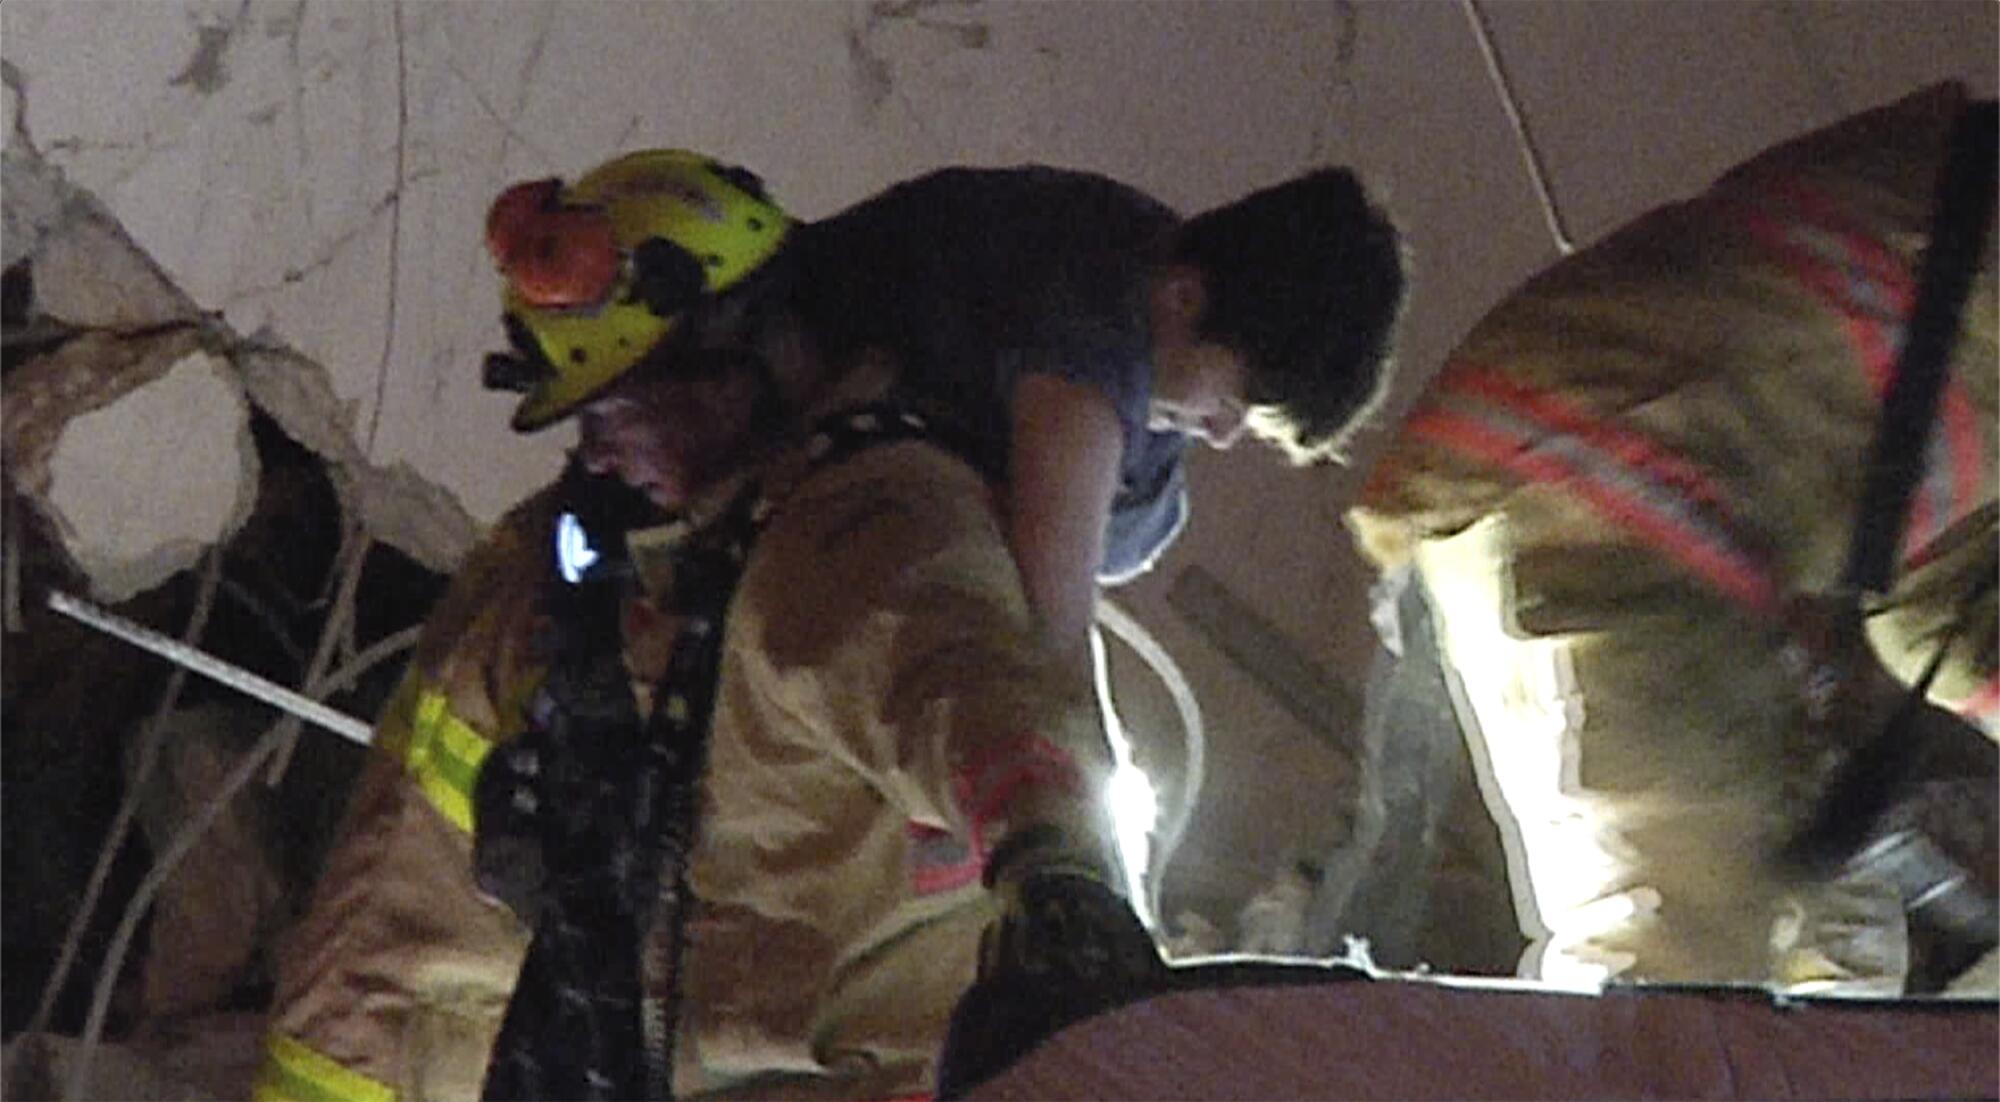 A firefighter carries a person. A gaping, broken wall is seen in the background.